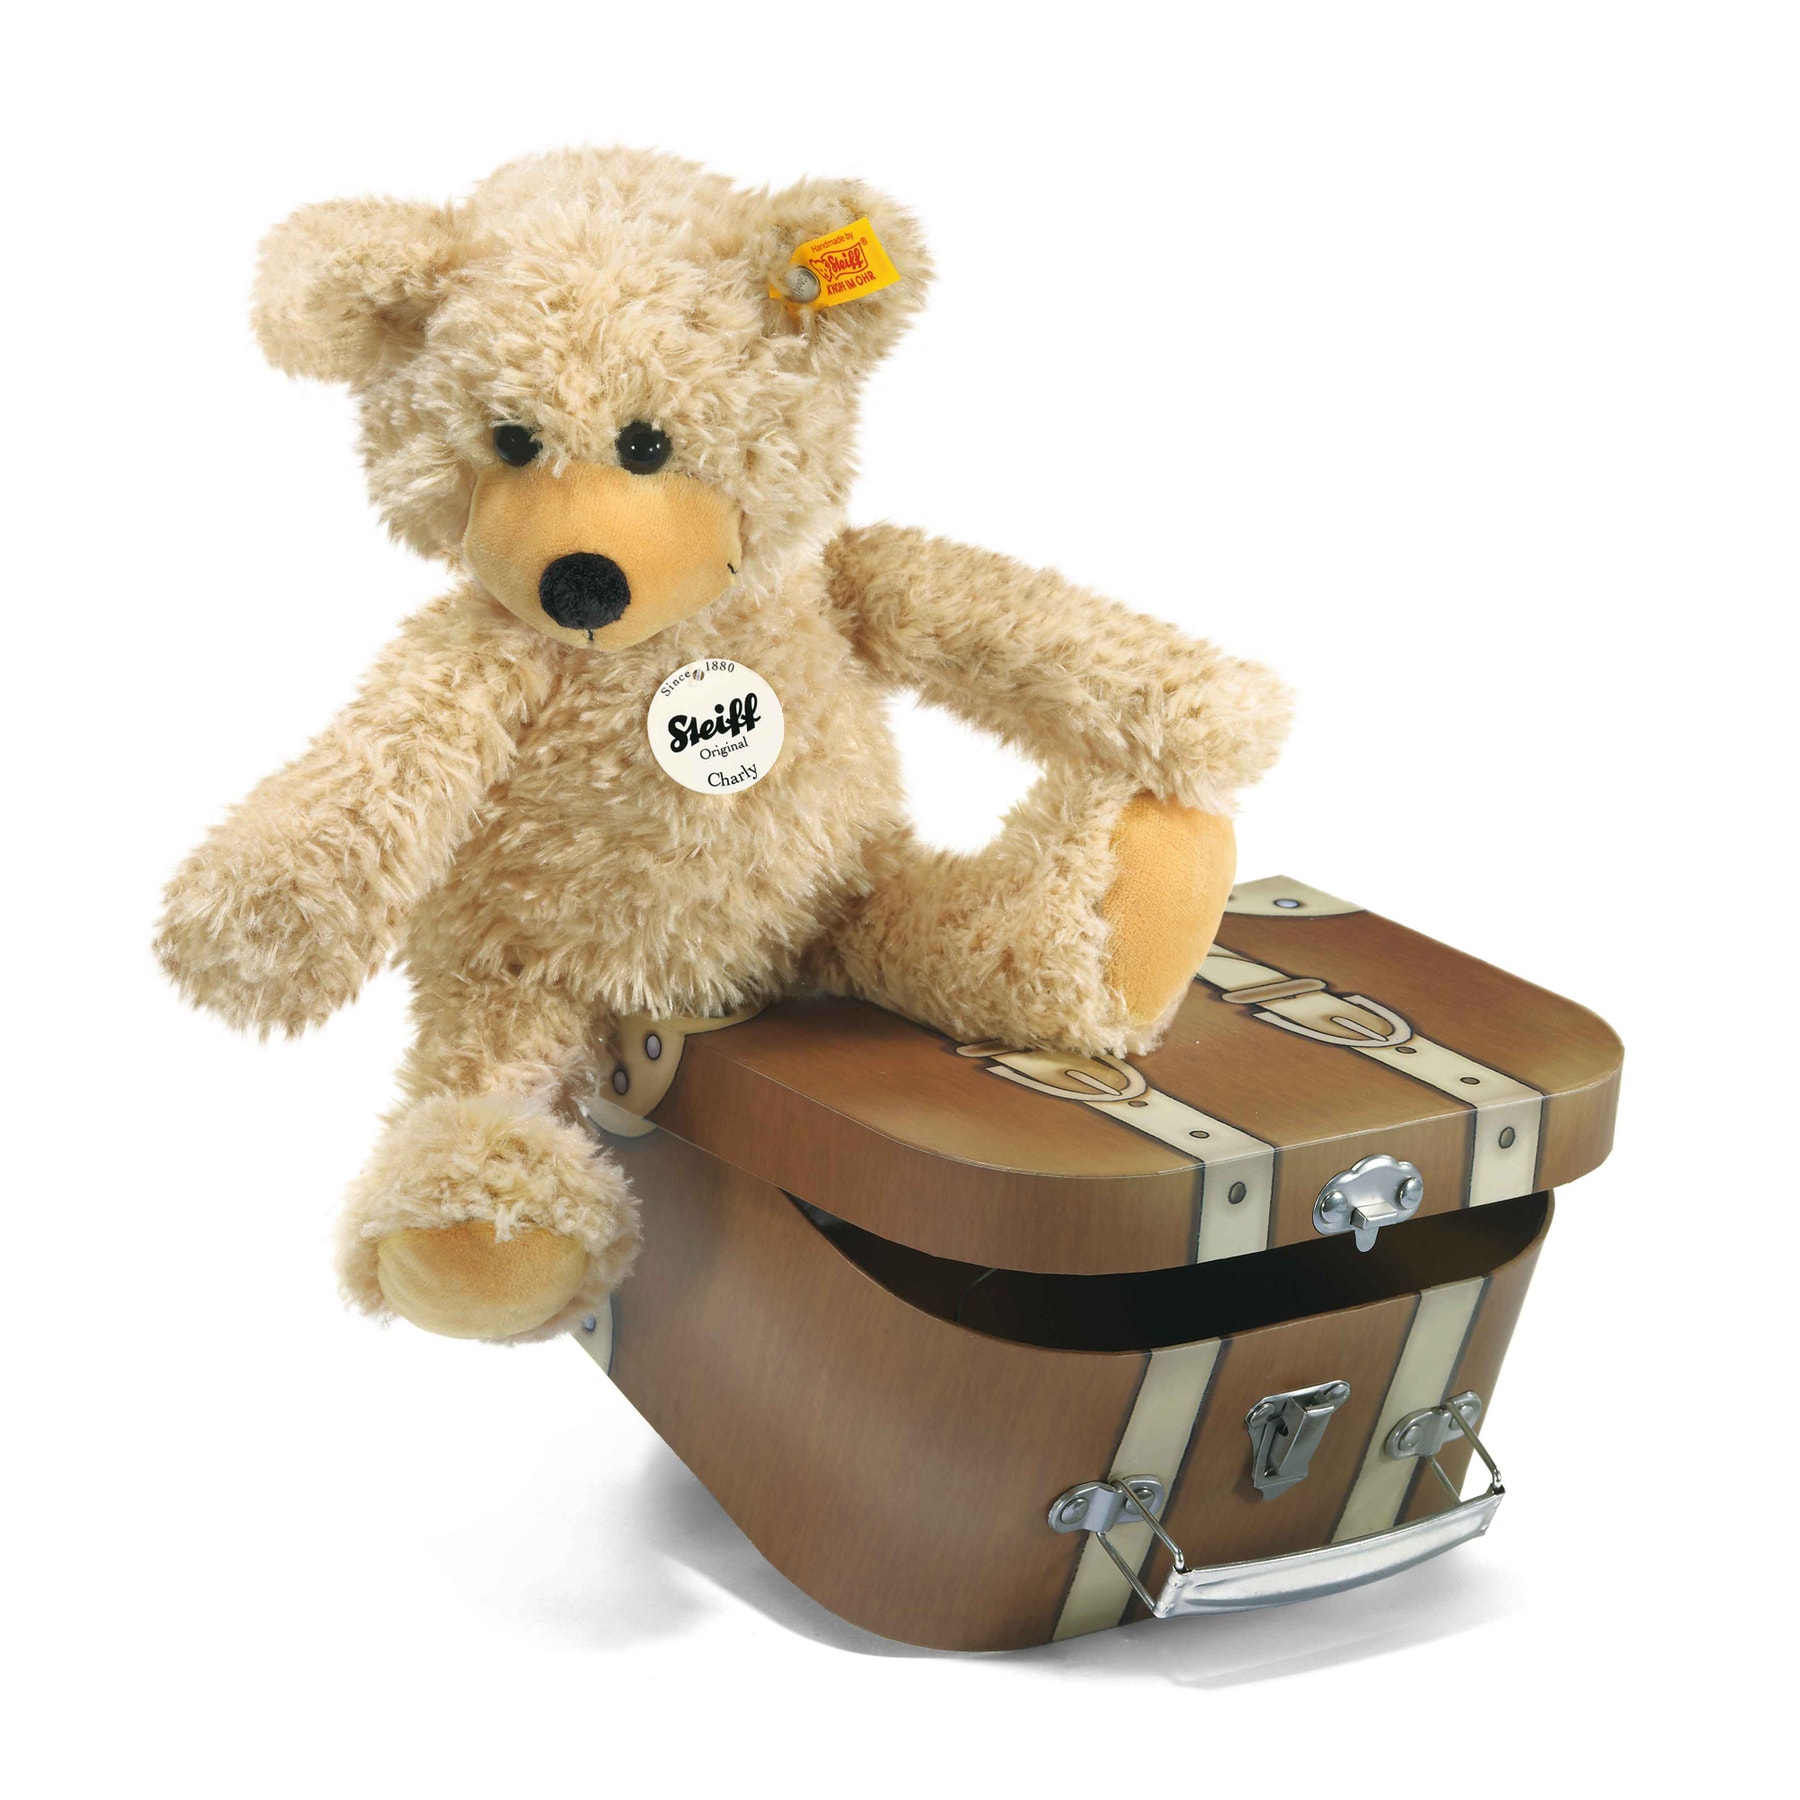 Ours Teddy-pantin Charly dans sa valise